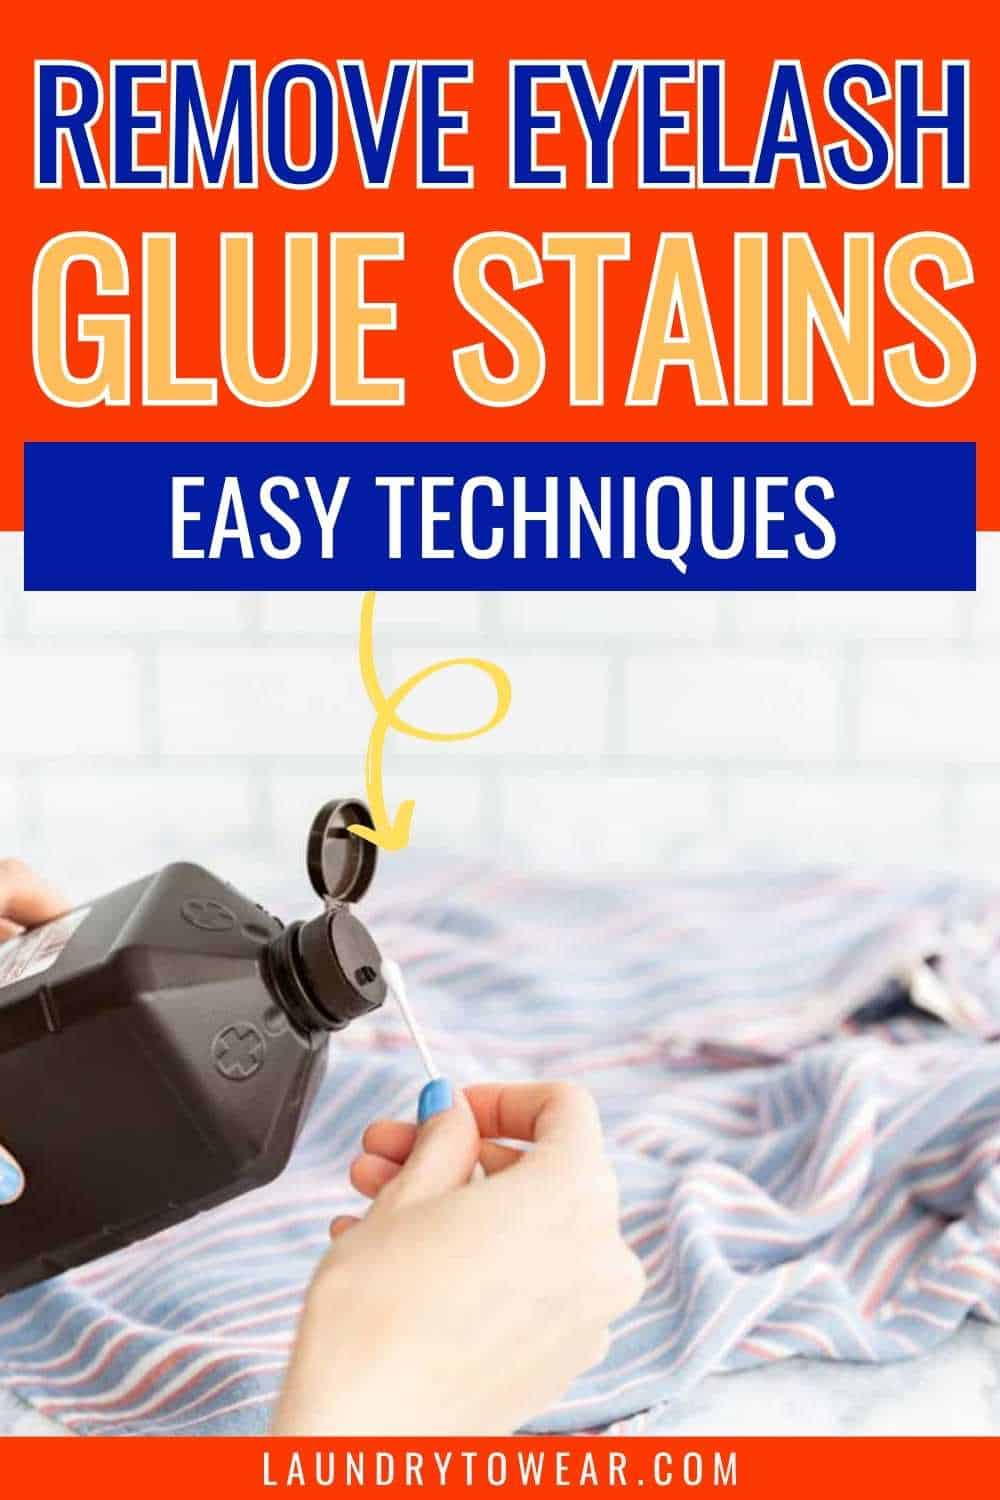 How to Remove Glue From Clothing: Top Solutions for Glue Stains